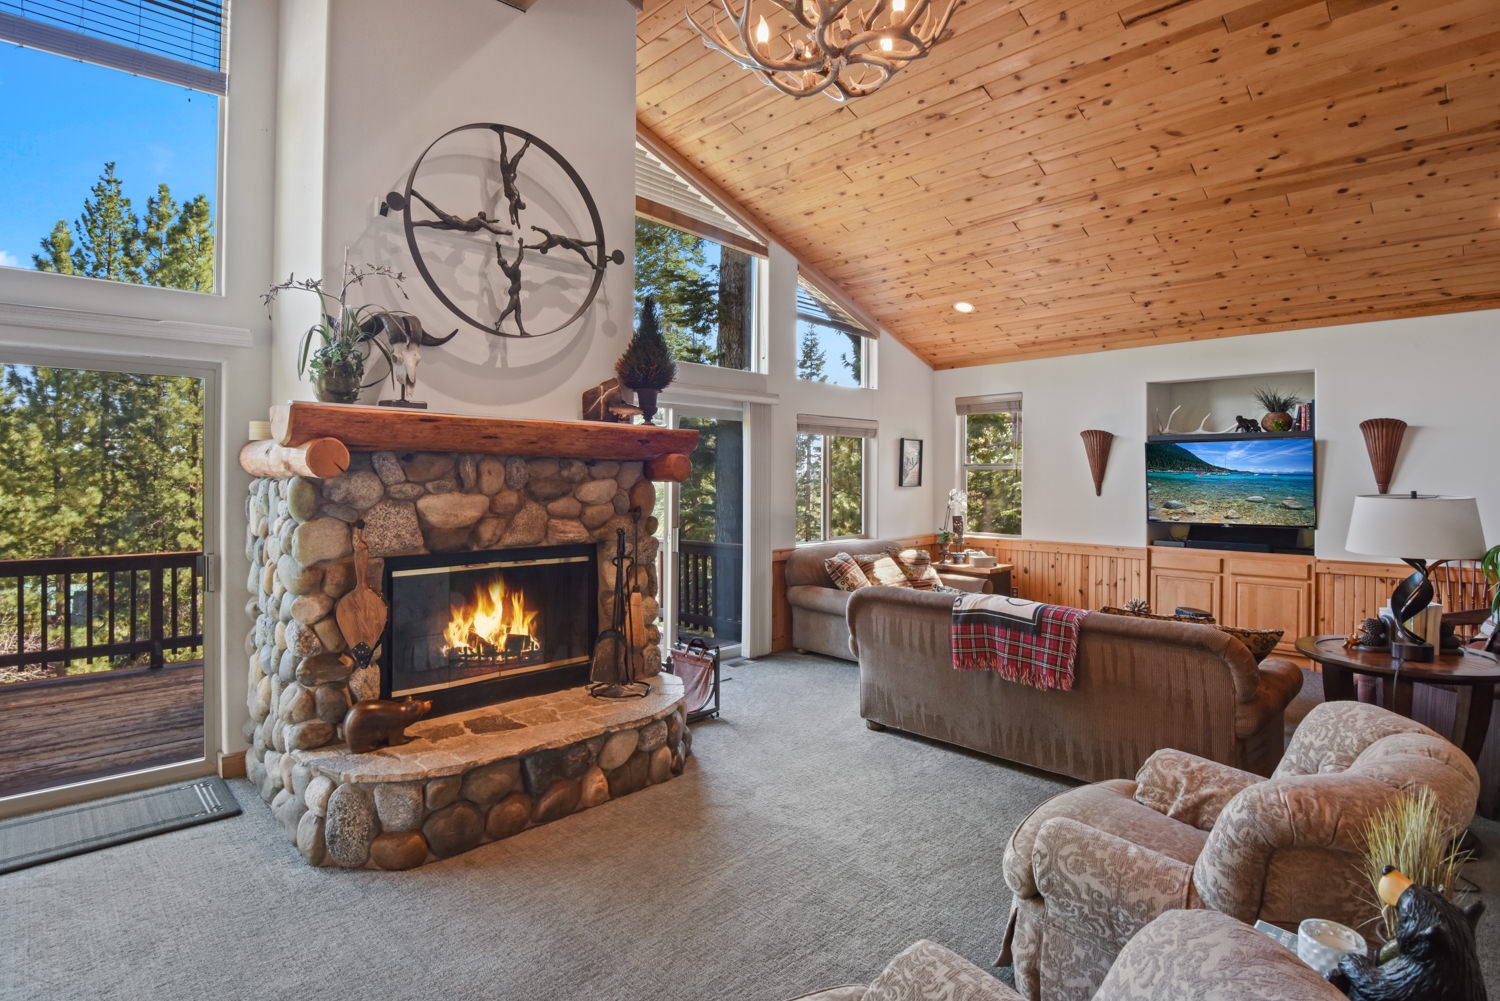 Living room is equipped with a fireplace